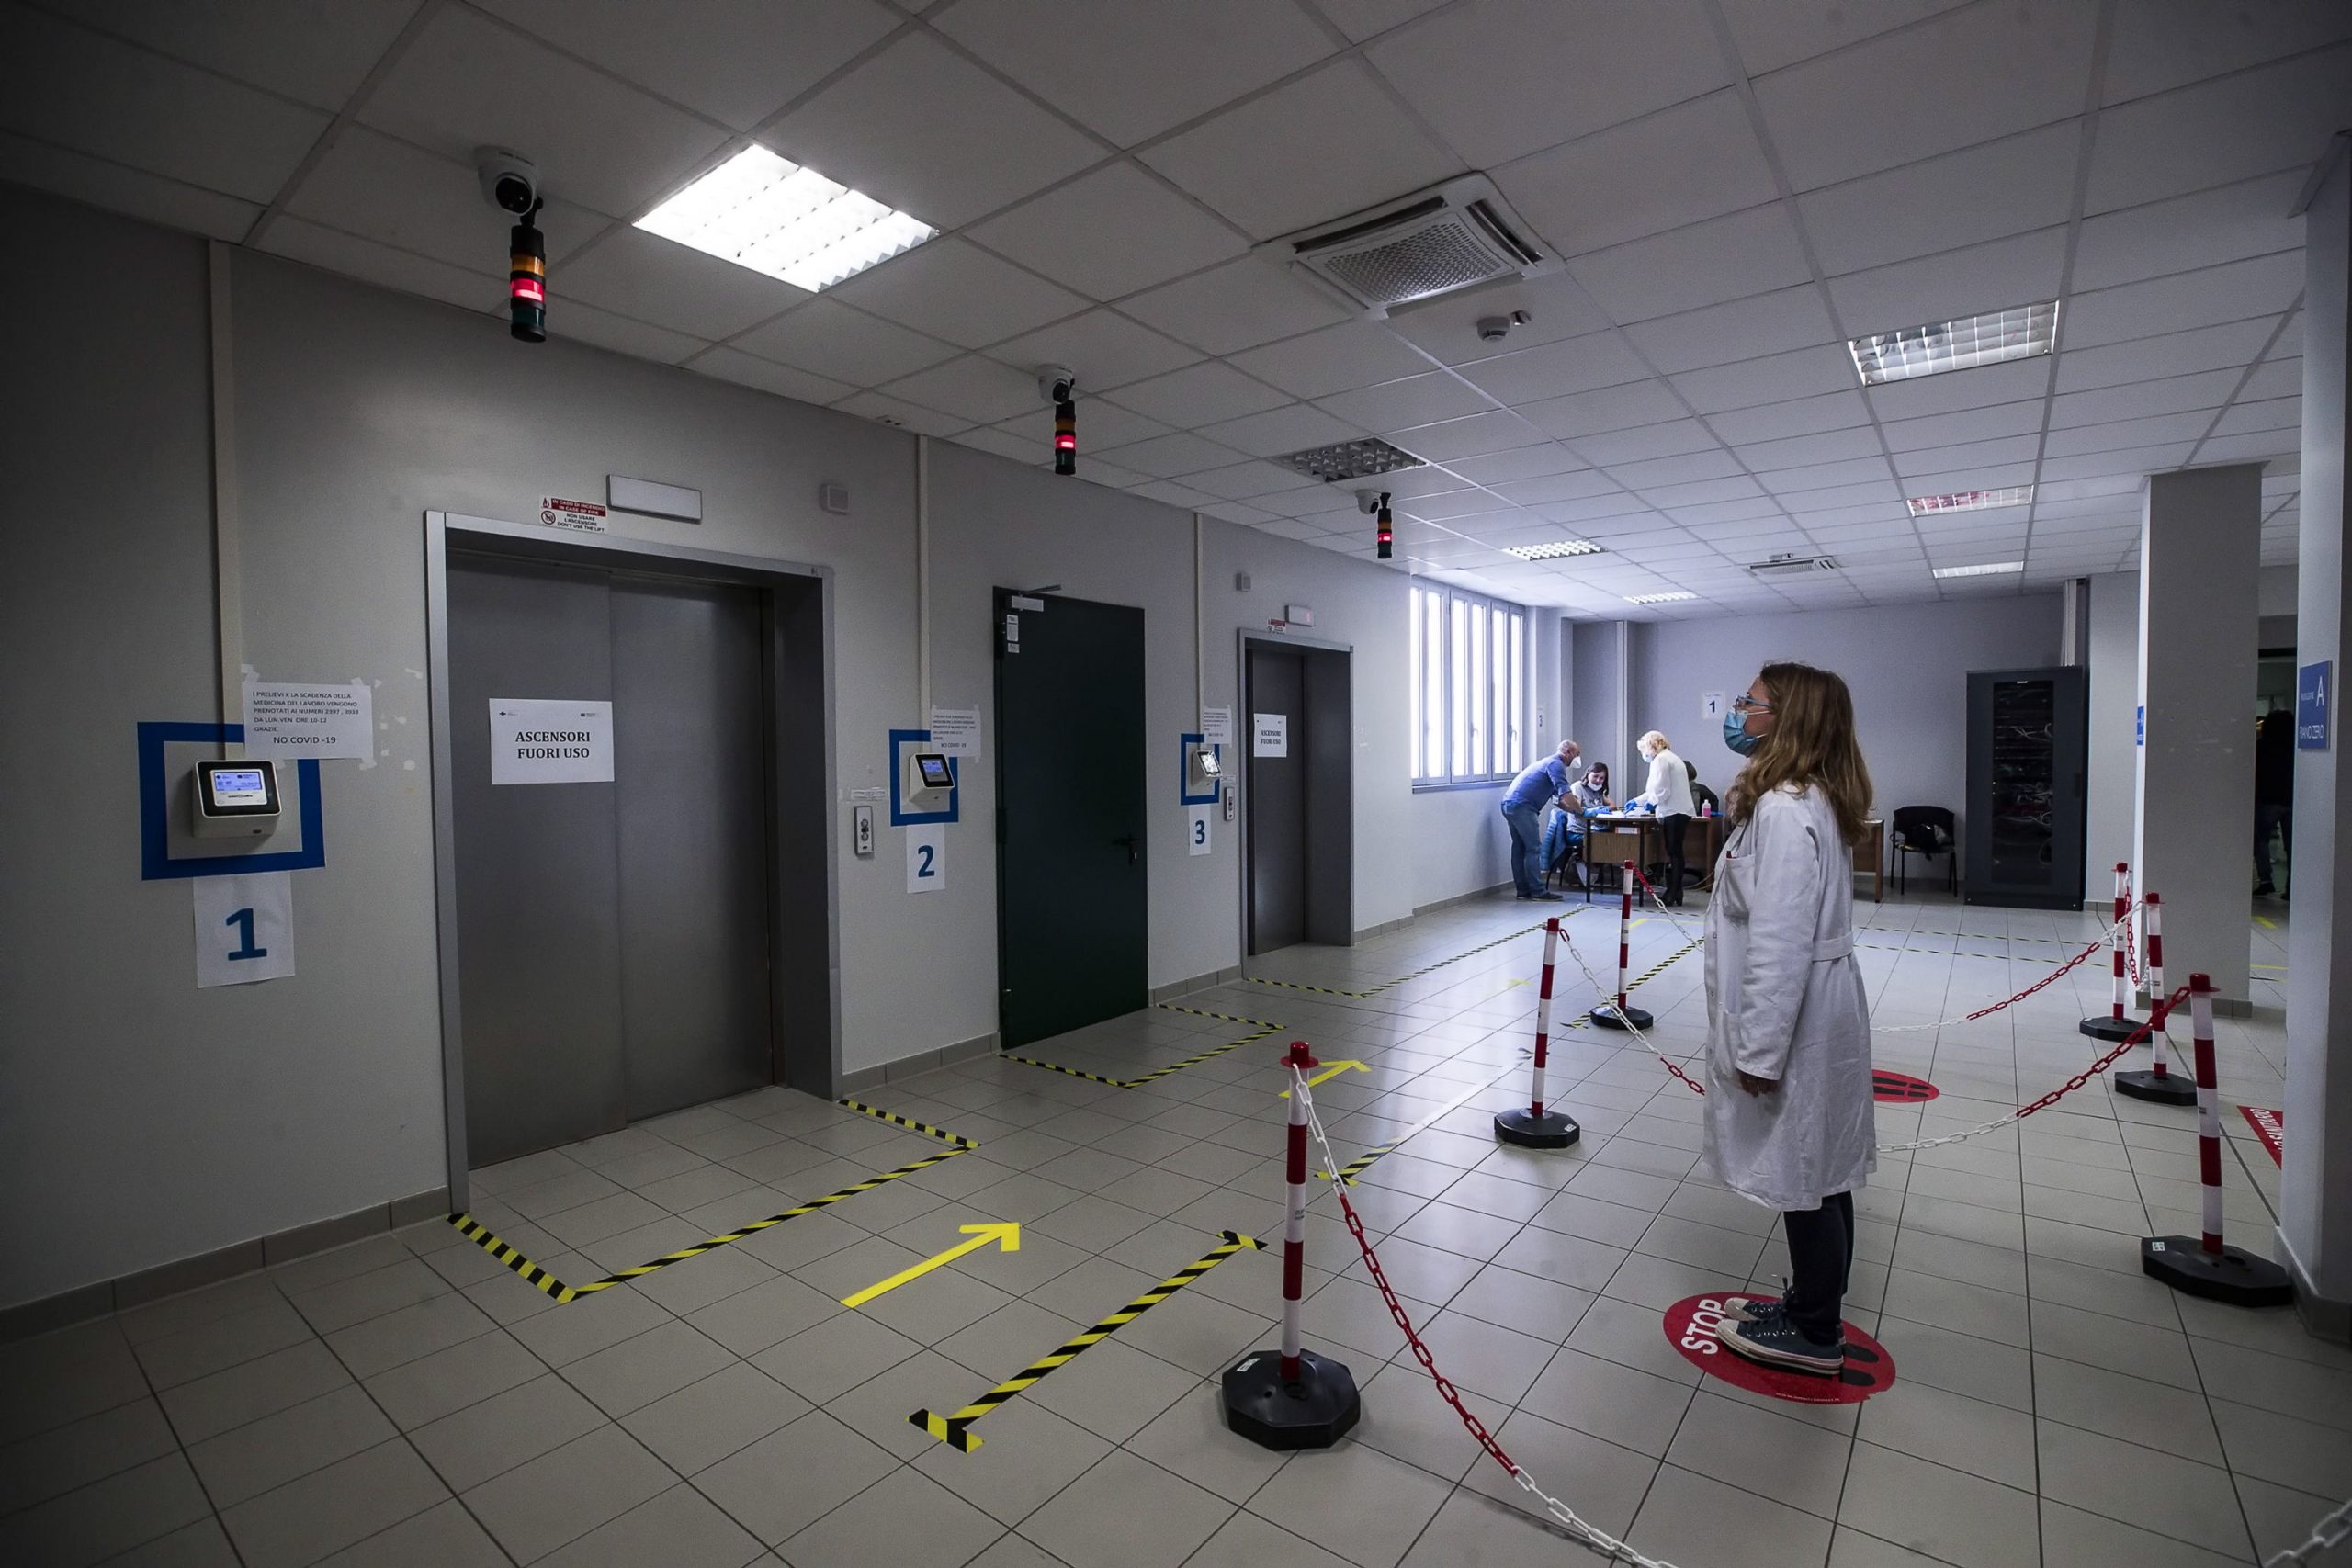 epa08404695 Thermal cameras are used to check the body temperature of medical personnel at the entrance of the San Filippo Neri hospital of the ASL Roma 1 during the COVID-19 coronavirus pandemic in Rome, Italy, 06 May 2020. Italy entered the second phase of its COVID-19 coronavirus emergency on 04 May with the start of the gradual relaxation of the lockdown measures that have been in force for 55 days.  EPA/ANGELO CARCONI